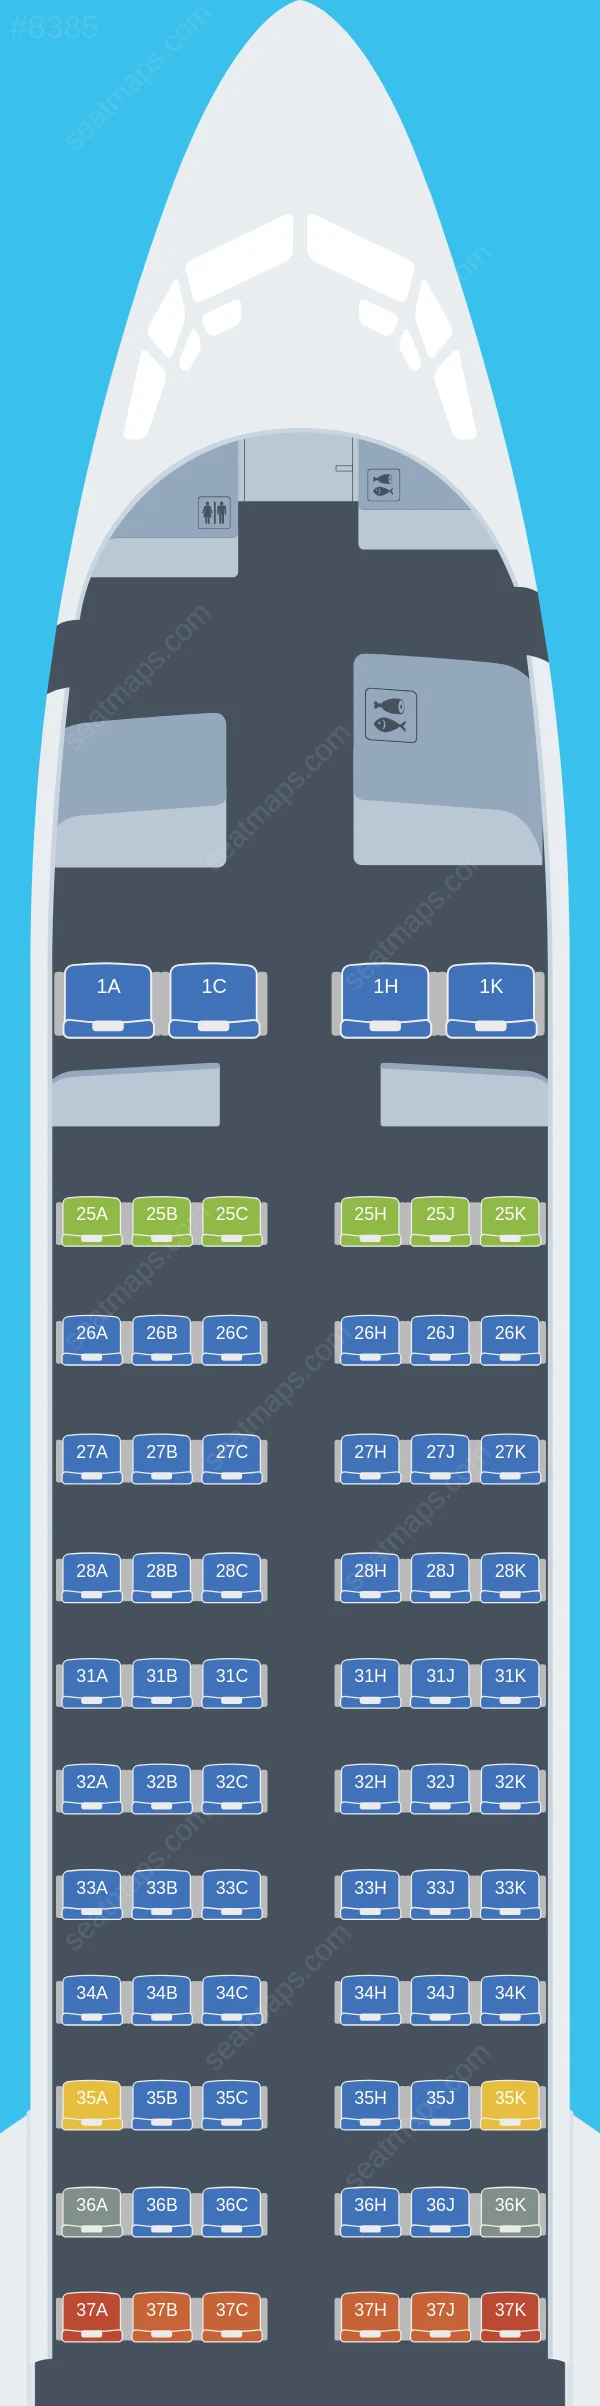 China Southern Boeing 737 MAX 8 seatmap preview